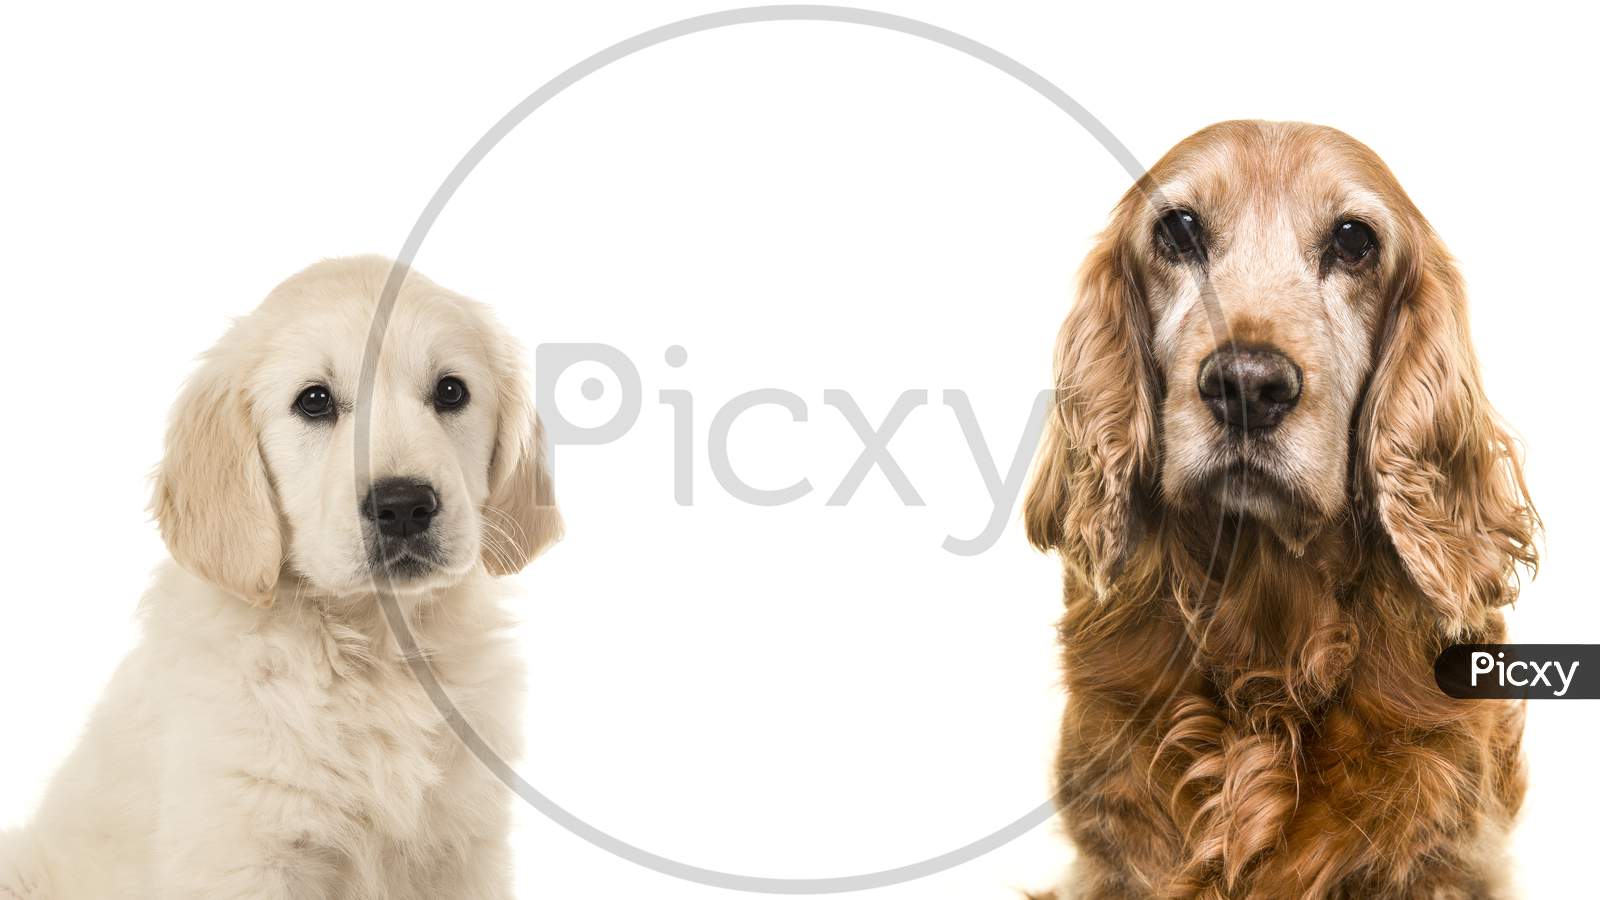 Portrait Of A Senior Cocker Spaniel Dog And A Young Golden Retriever Puppy On A White Background